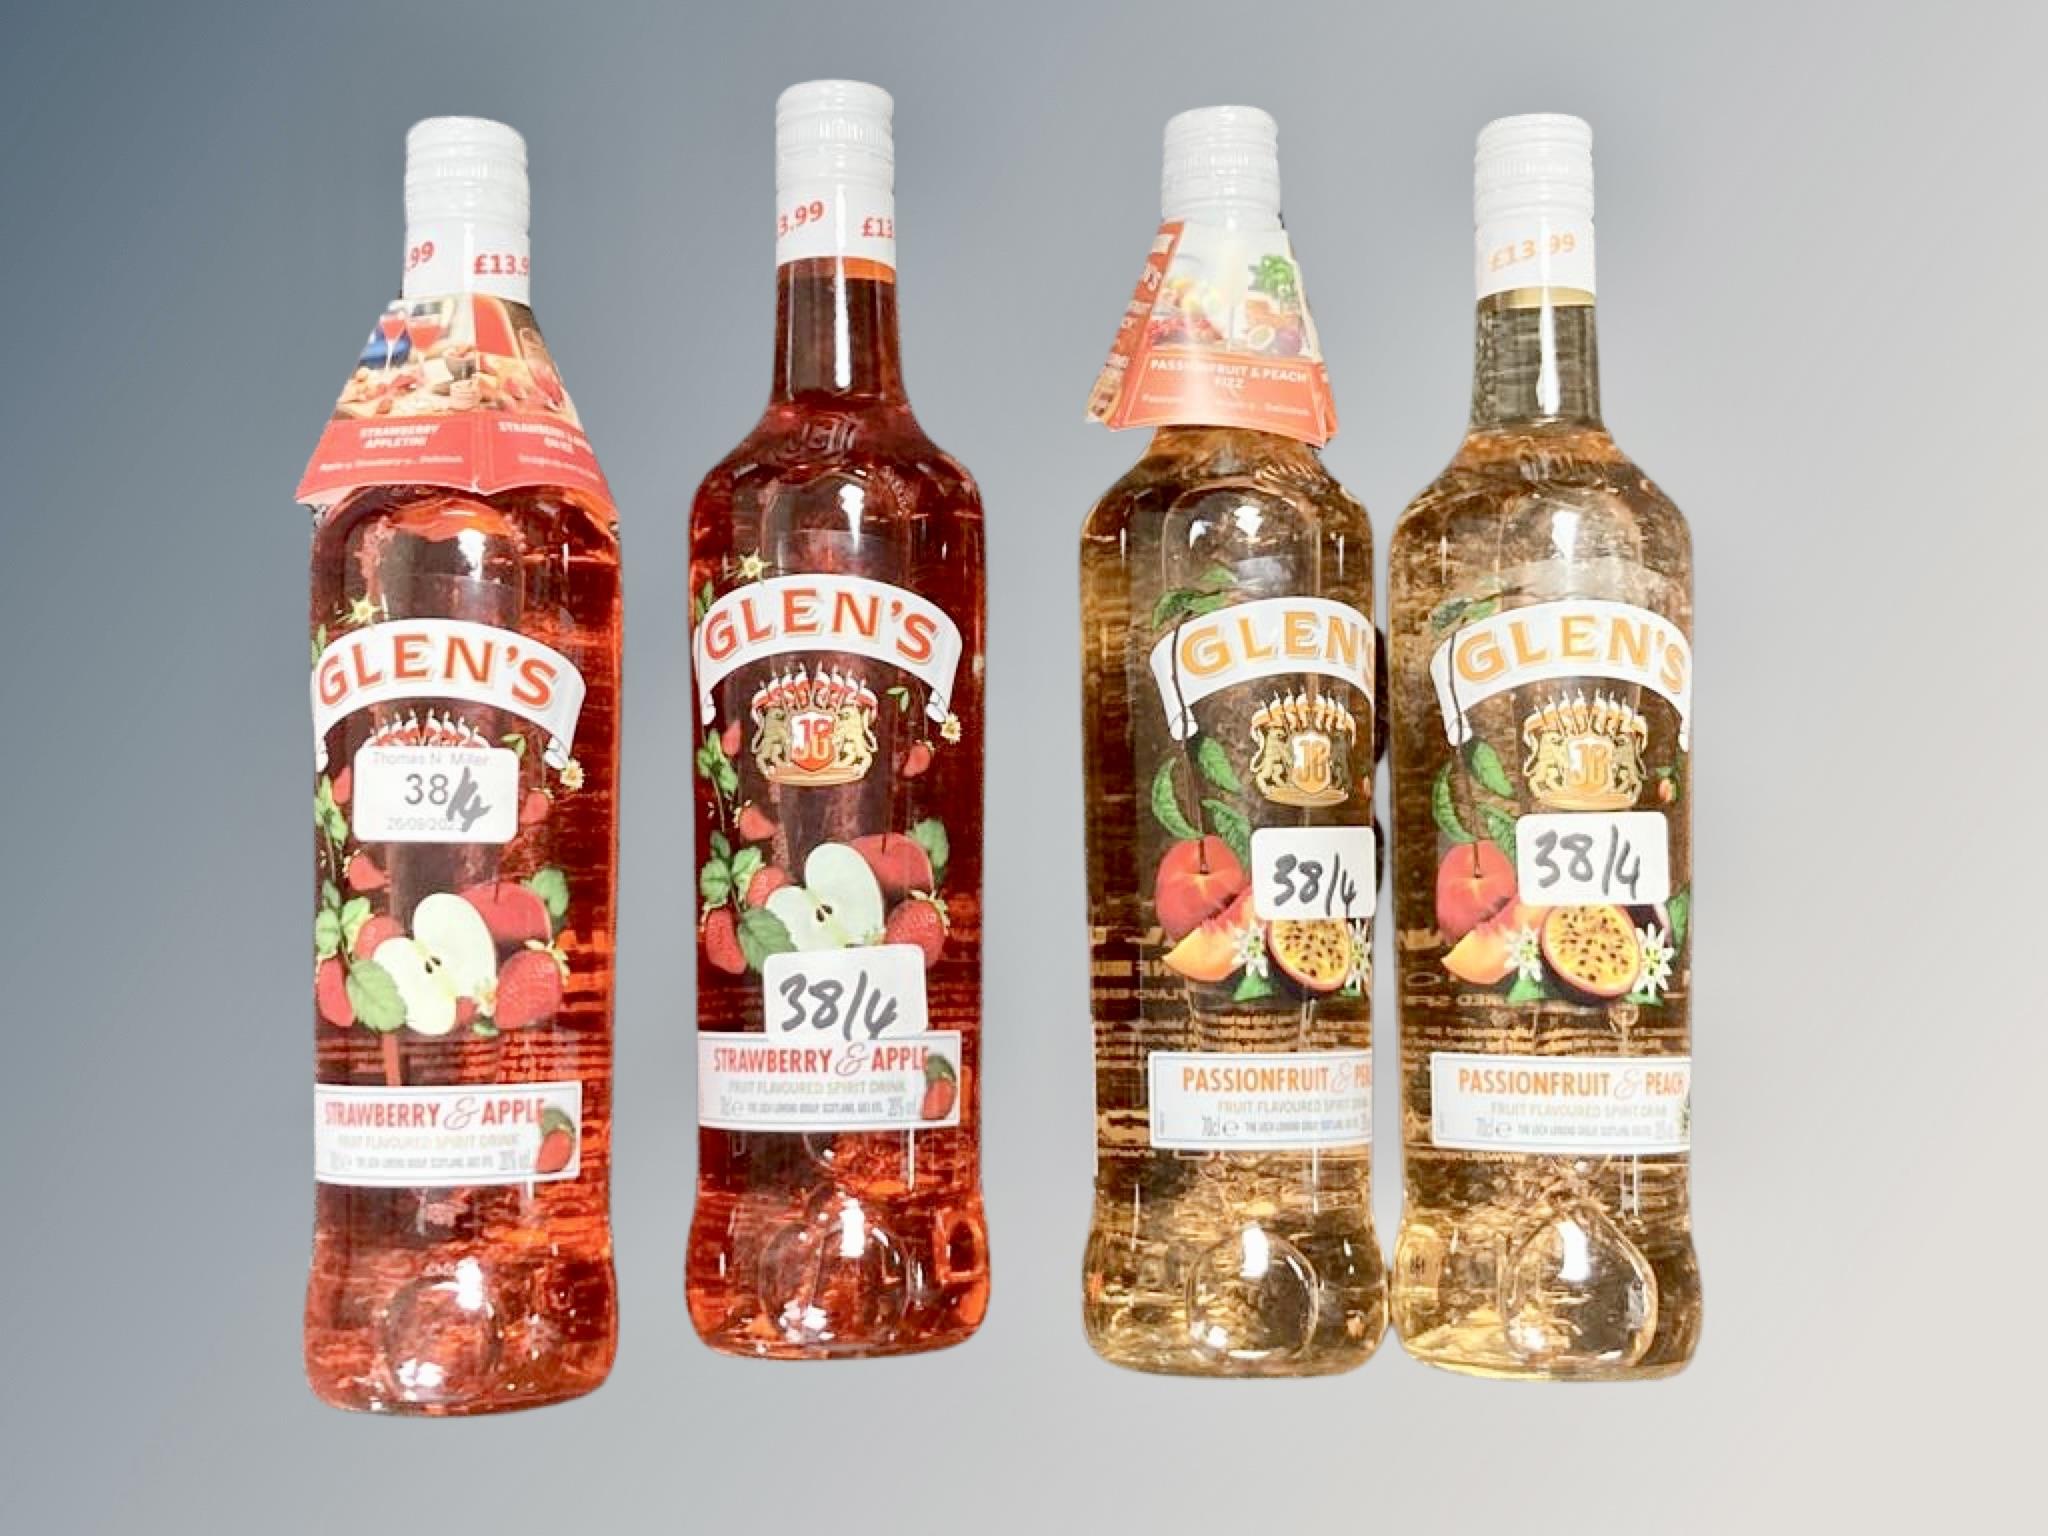 4 x Glen's Spirit Drink : 2 x Passion Fruit & Peach and 2 x Strawberry & Apple, all 70 cl.